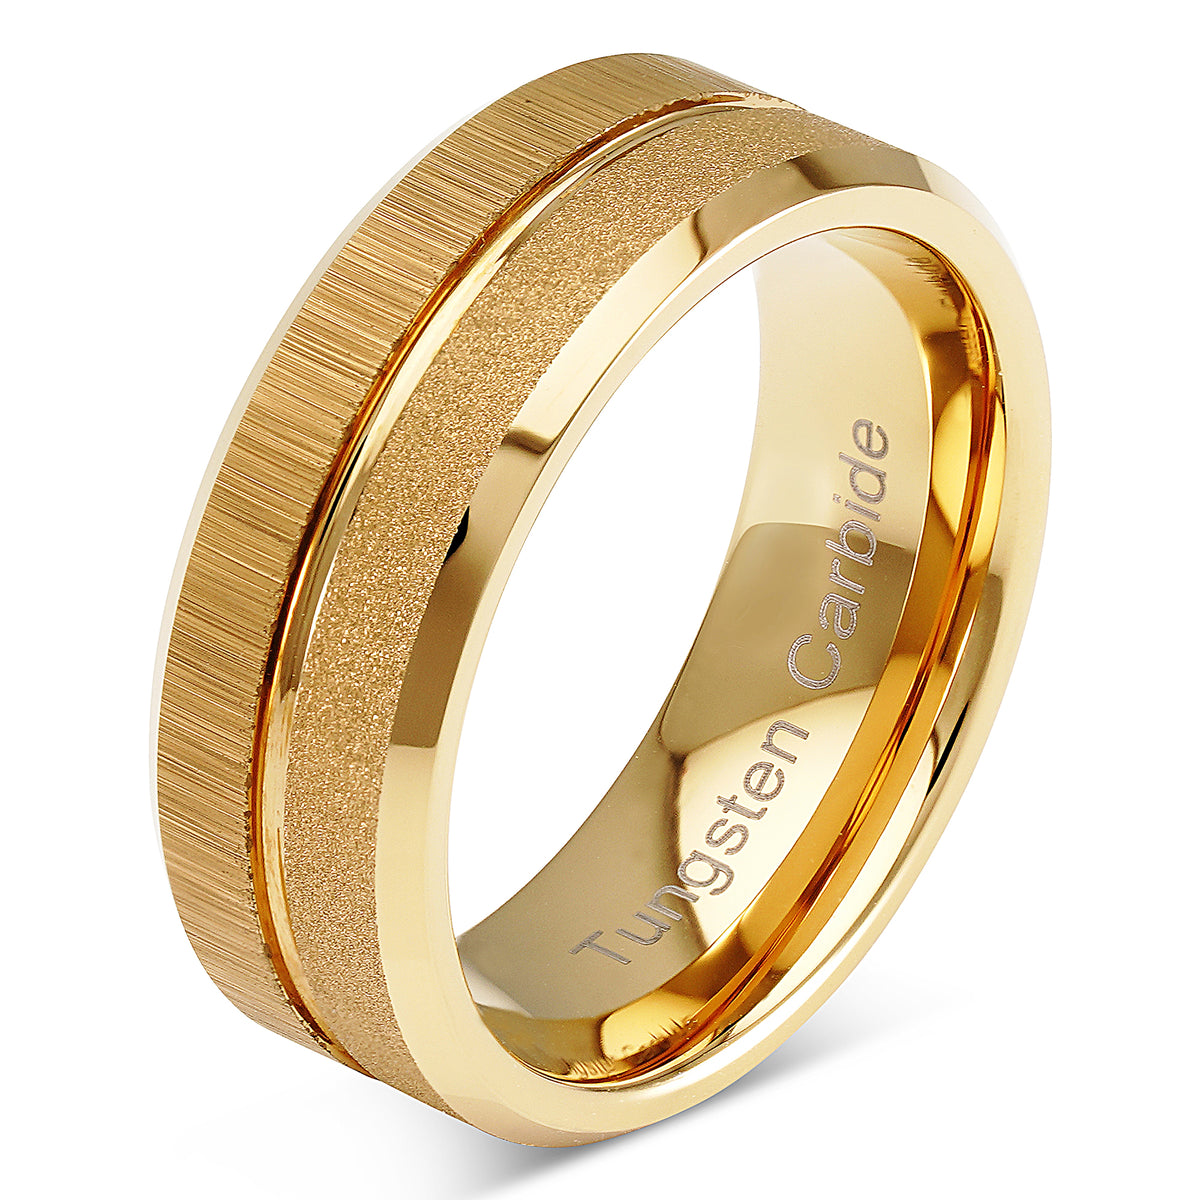 100s Jewelry Tungsten Rings for Men Wedding Bands Gold Sandblast Brushed Grooved Size 6-16, 7.5 - 100s Jewelry